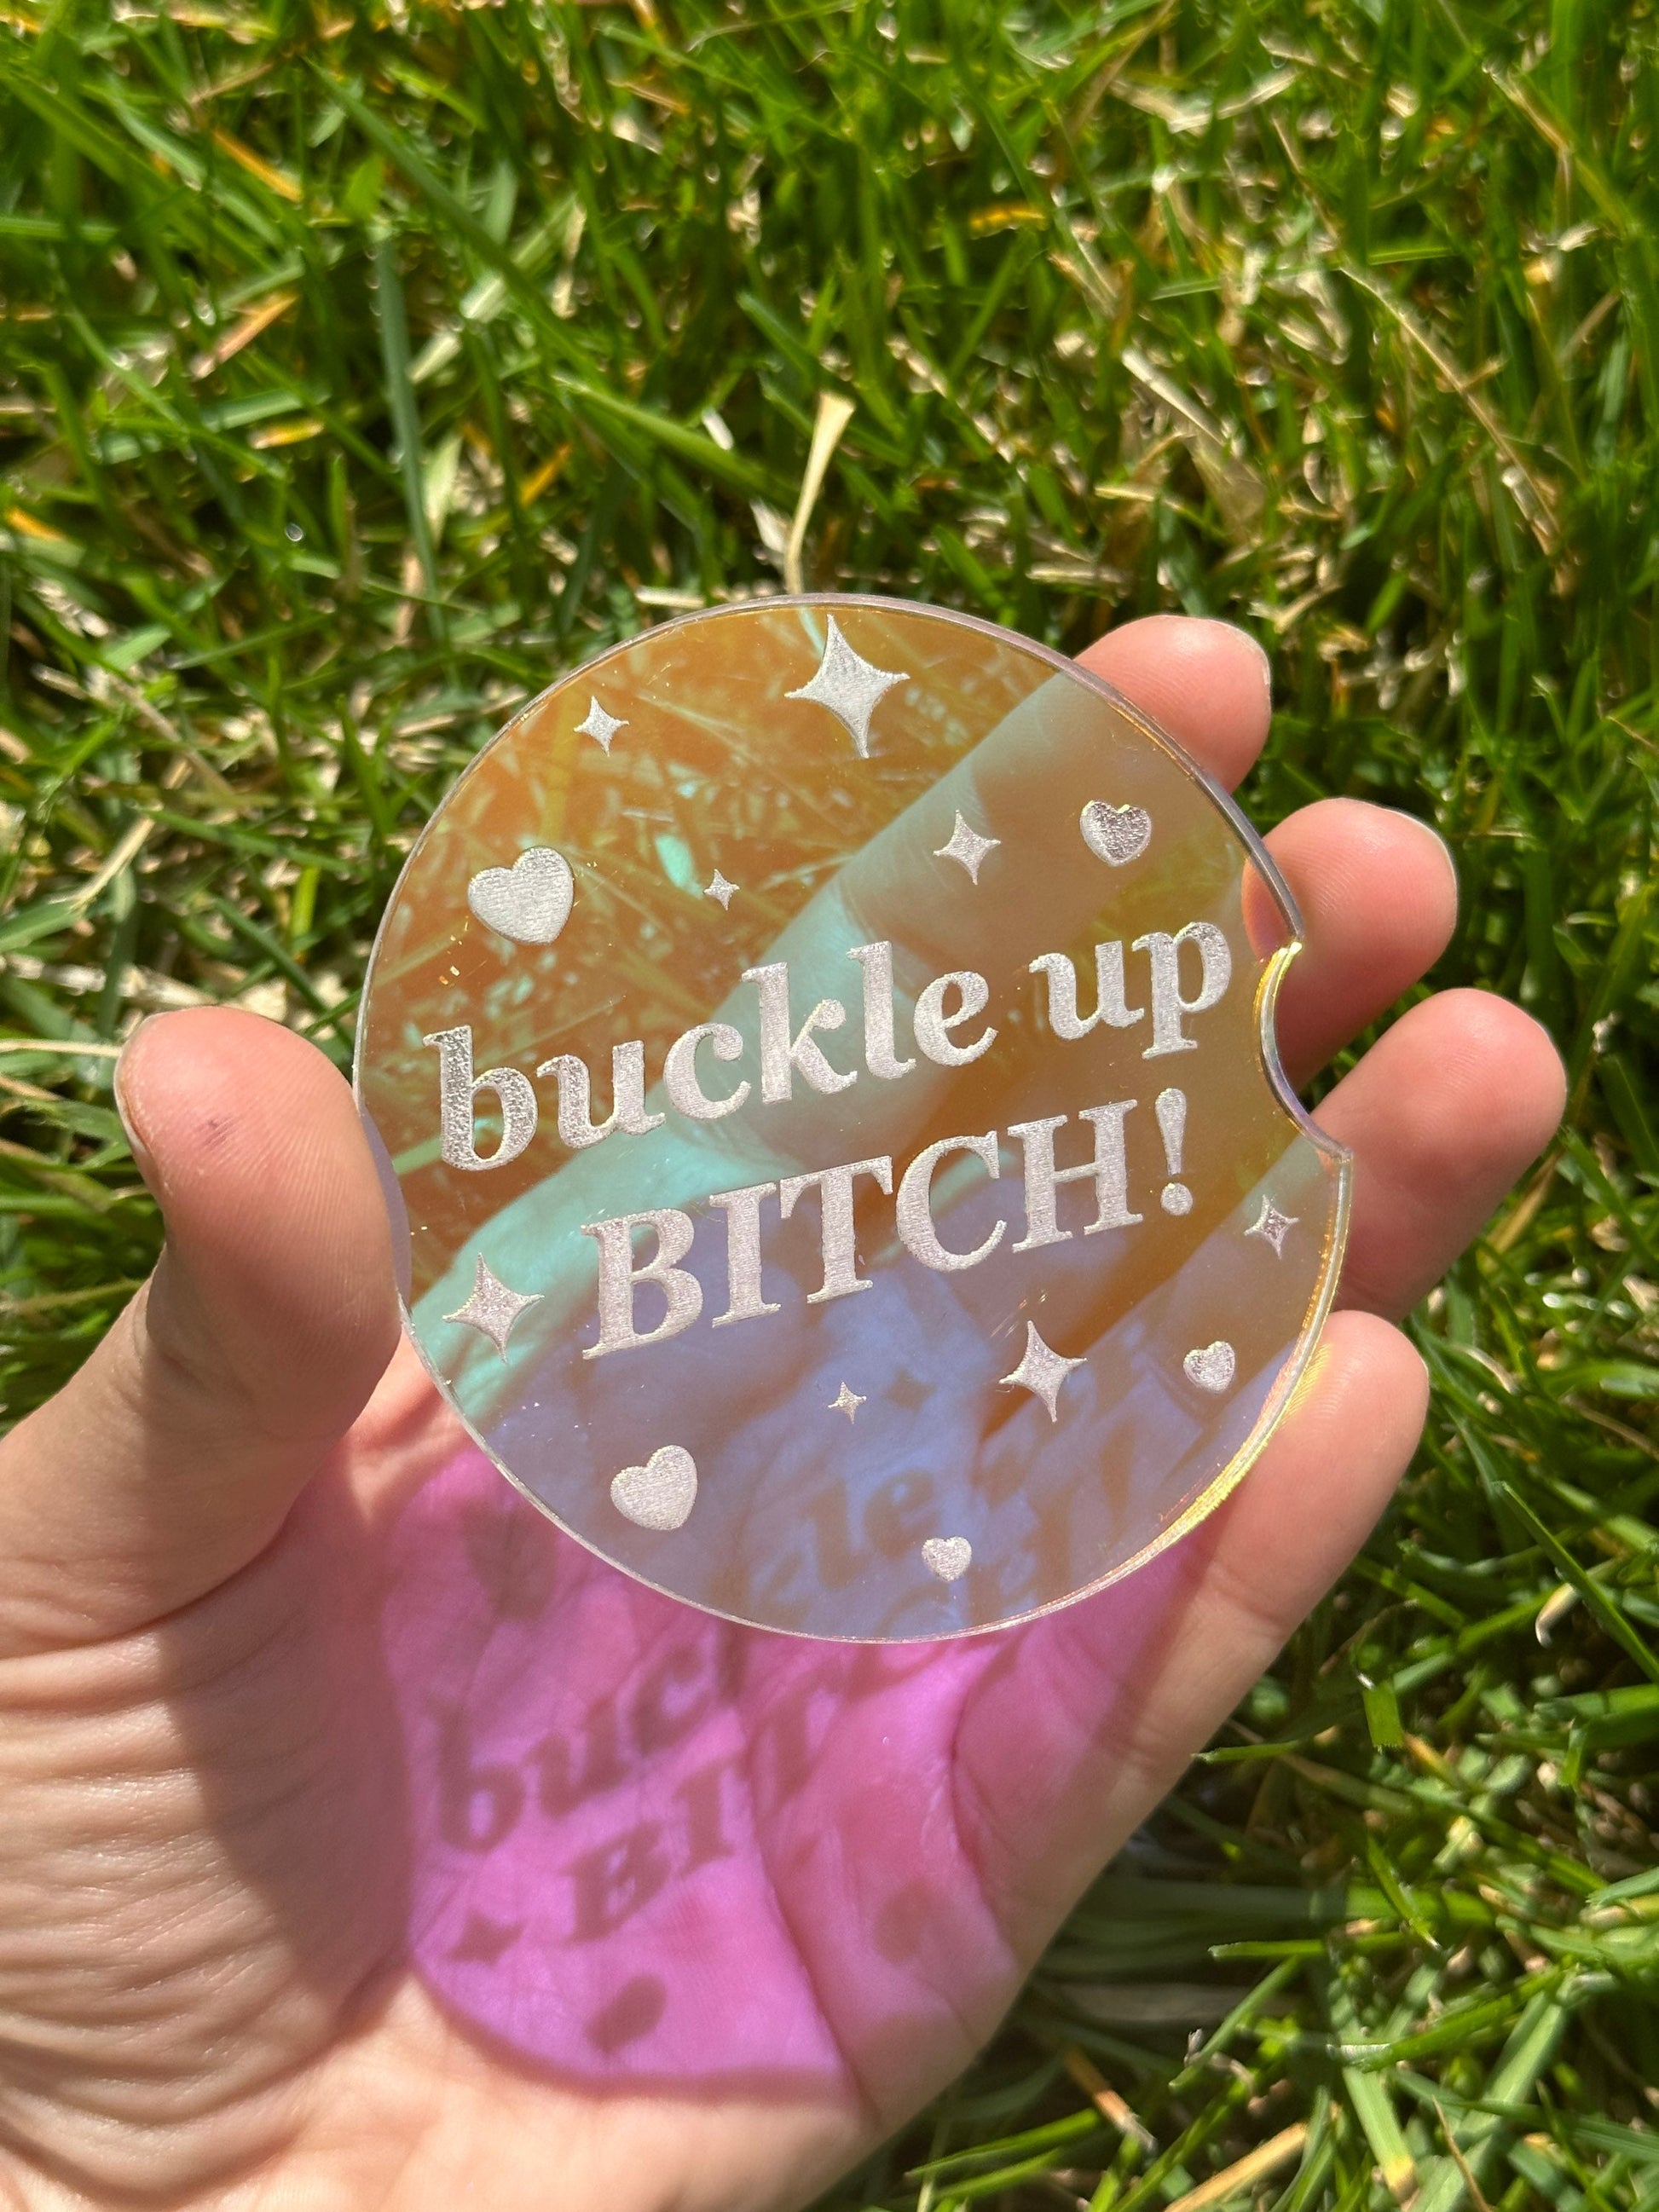 3 Inch Iridescent Car Coaster (Set of 2) - Buckle up BITCH!